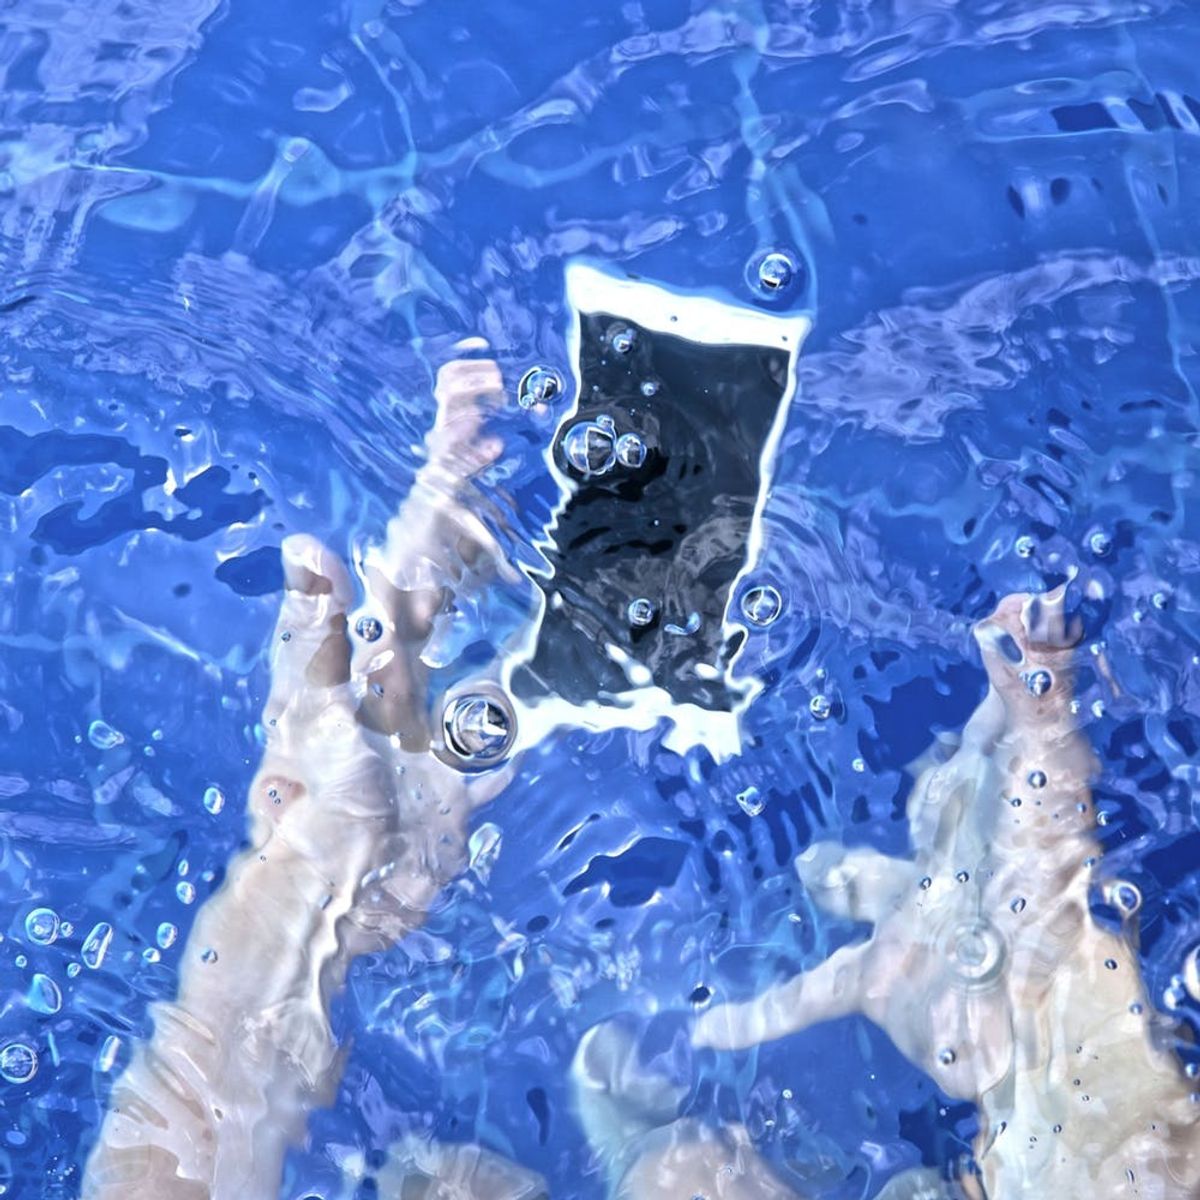 Putting Your Water-Damaged Phone in Rice Doesn’t Work